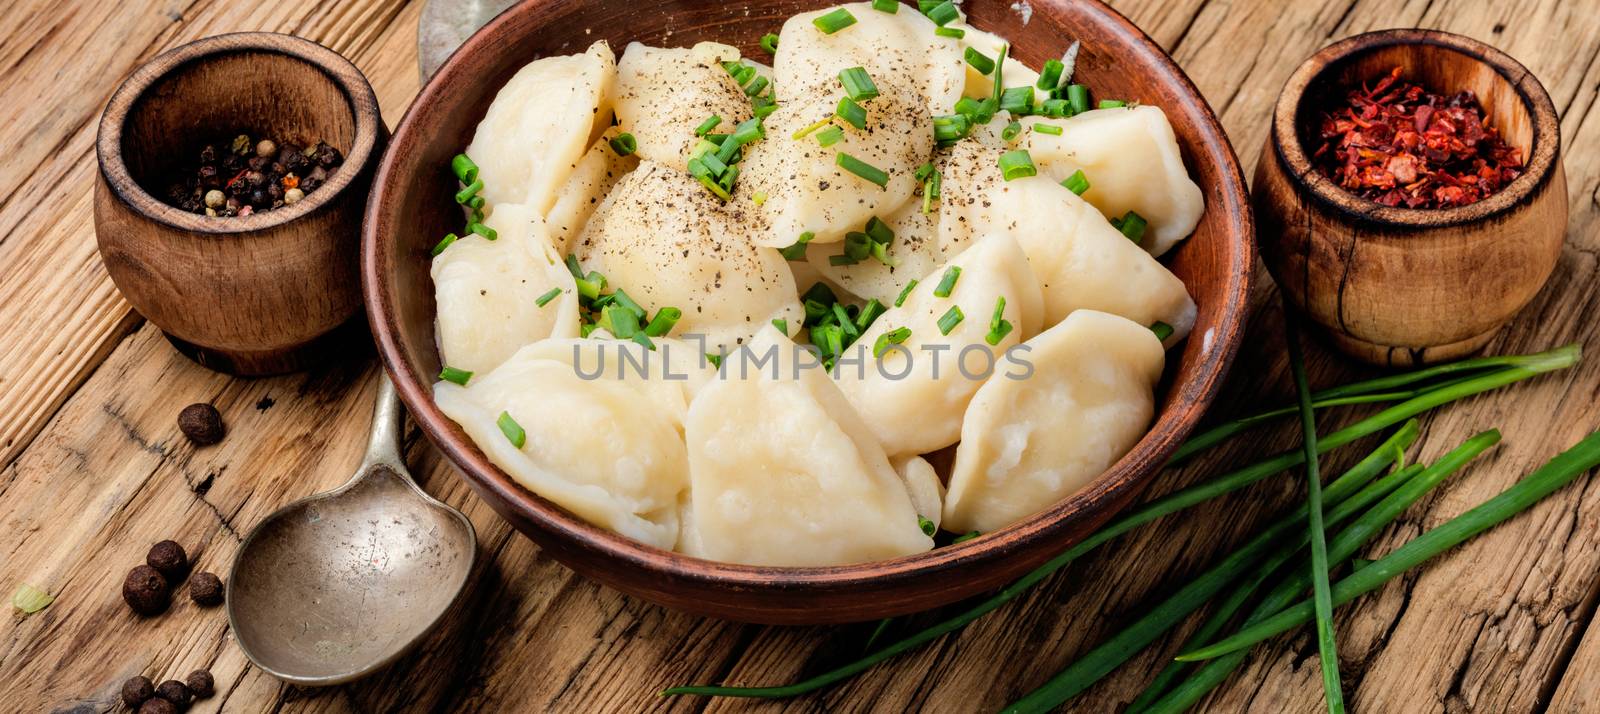 Dumplings is a Slavic dish, common in Ukrainian cuisine, in the form of boiled unleavened dough stuffed with vegetables